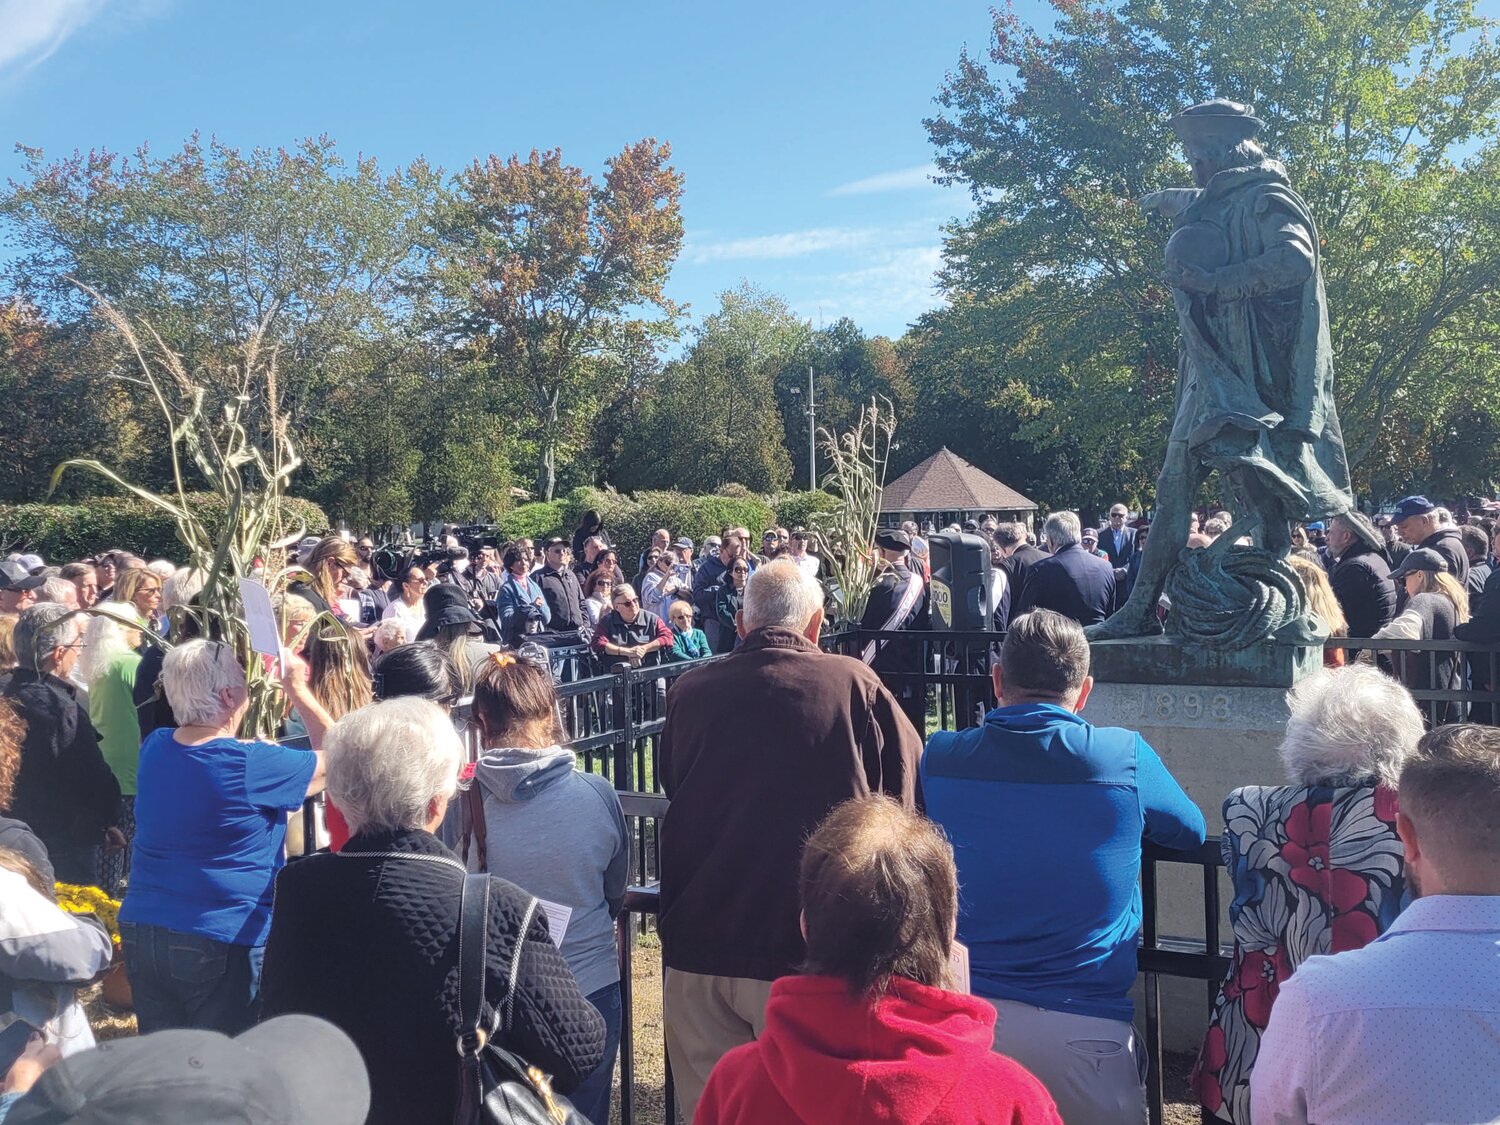 COLUMBUS DAY CROWD: The island at Memorial Park was packed Monday as Johnston celebrated the unveiling of their new/old Columbus statue.